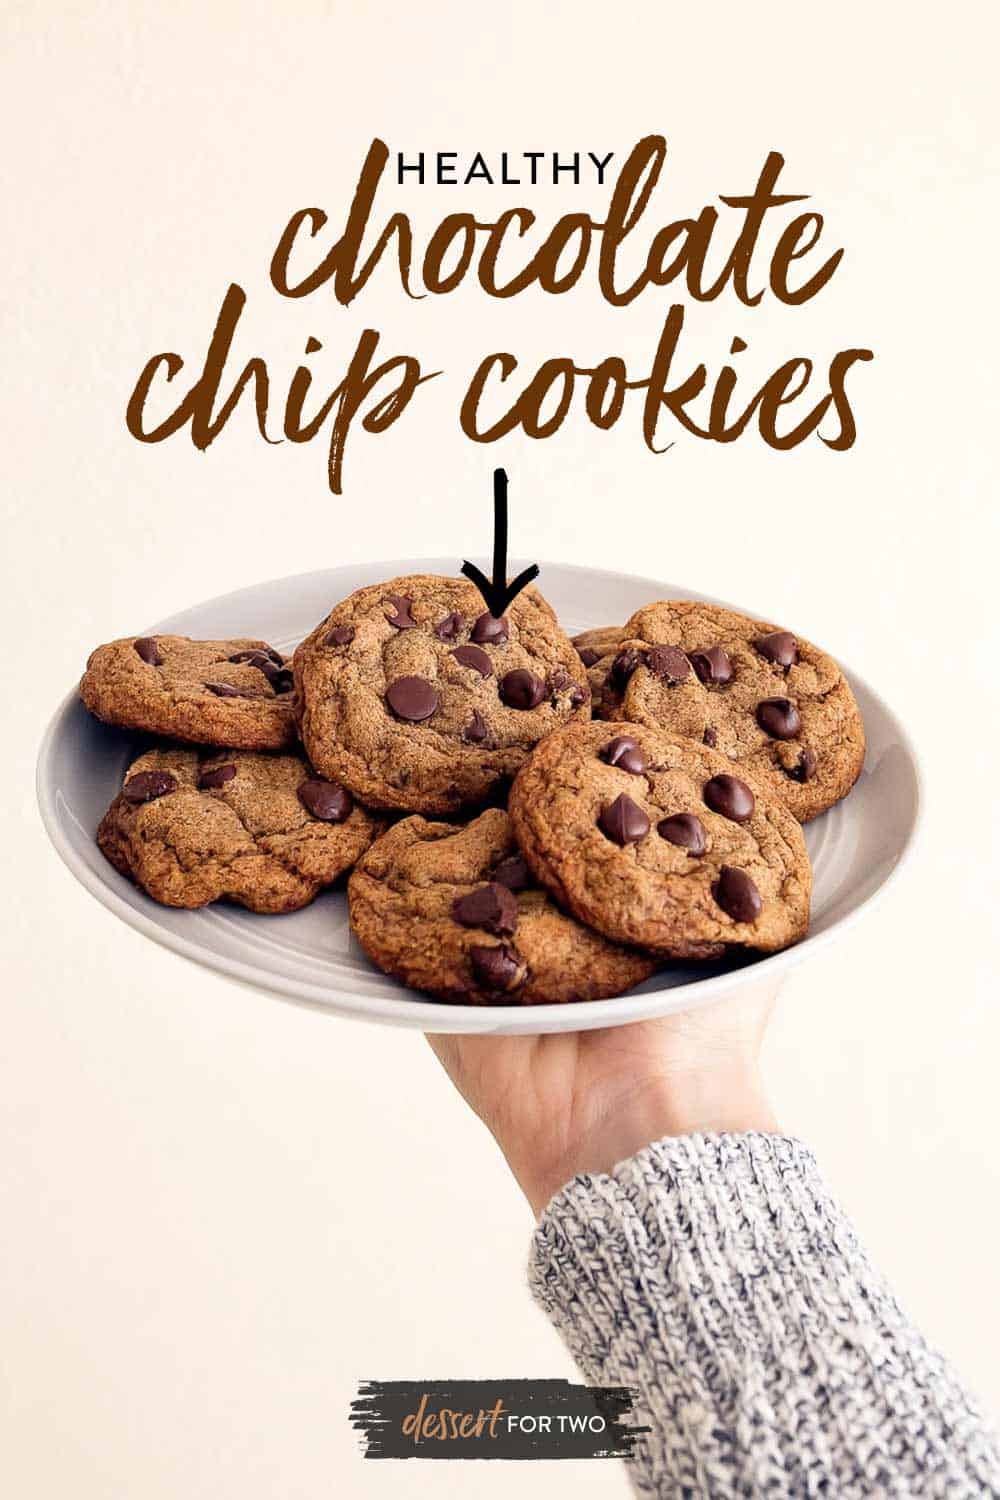 Coconut oil chocolate chip cookies naturally sweetened with coconut sugar and whole wheat flour. Healthy small batch chocolate chip cookies recipe. Recipe makes a half batch of cookies, 8 cookies